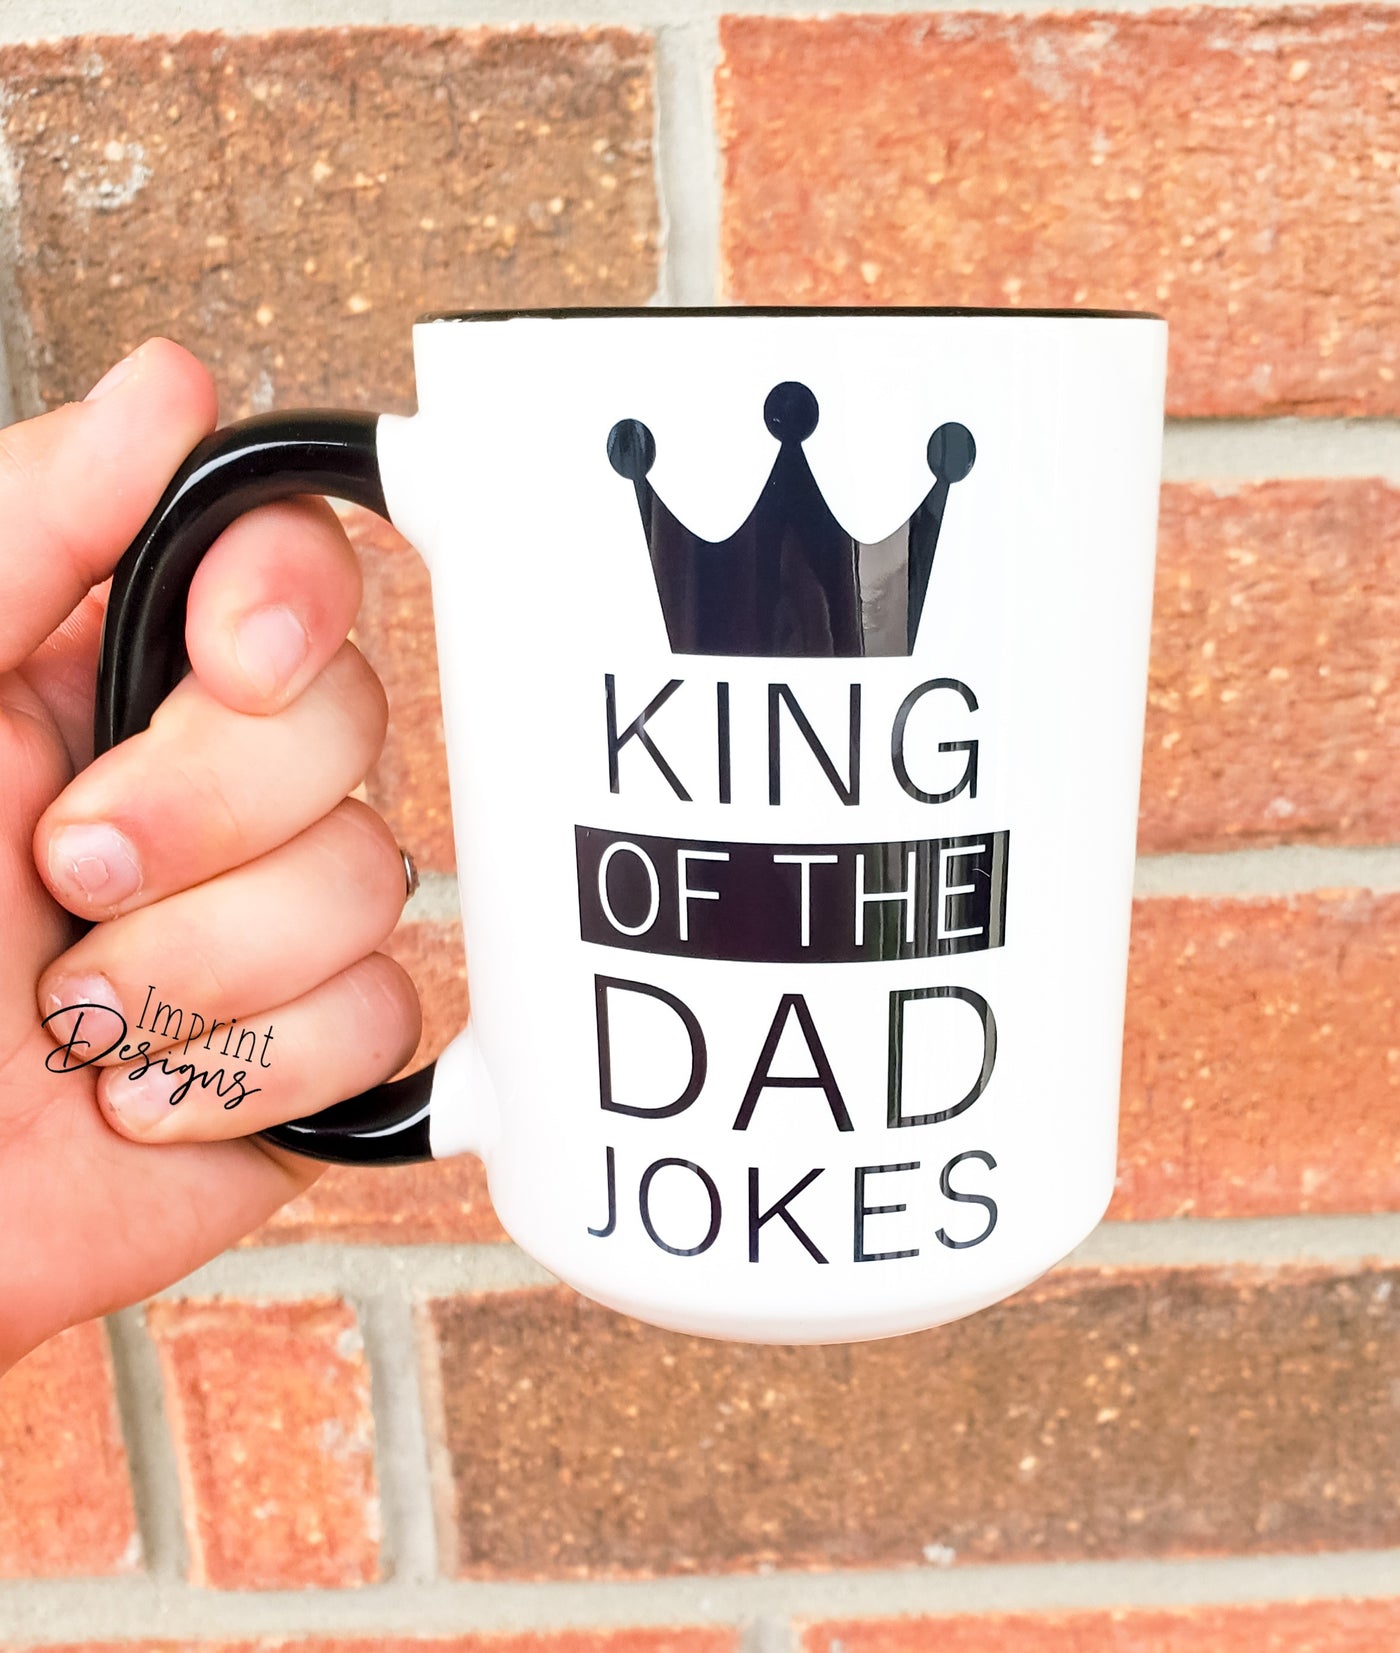 King of the Dad jokes